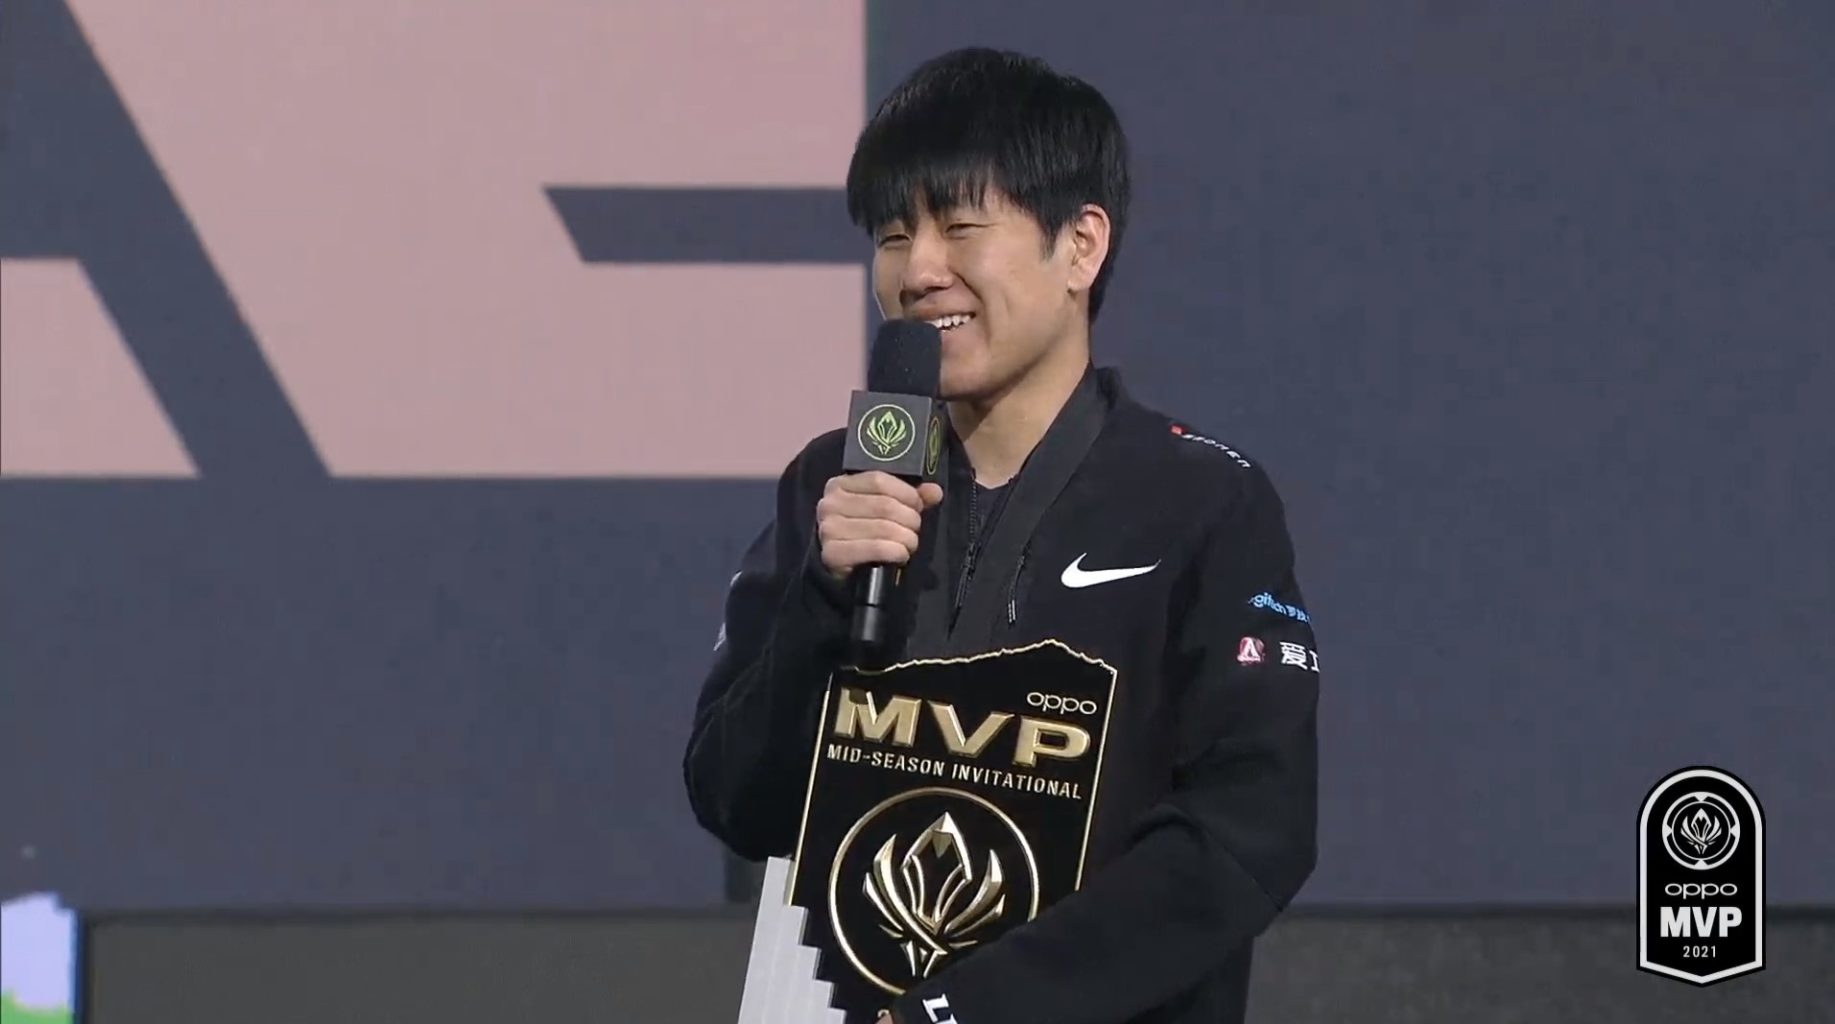 RNG GALA won MVP of the 2021 MSI Finals against DWG. 